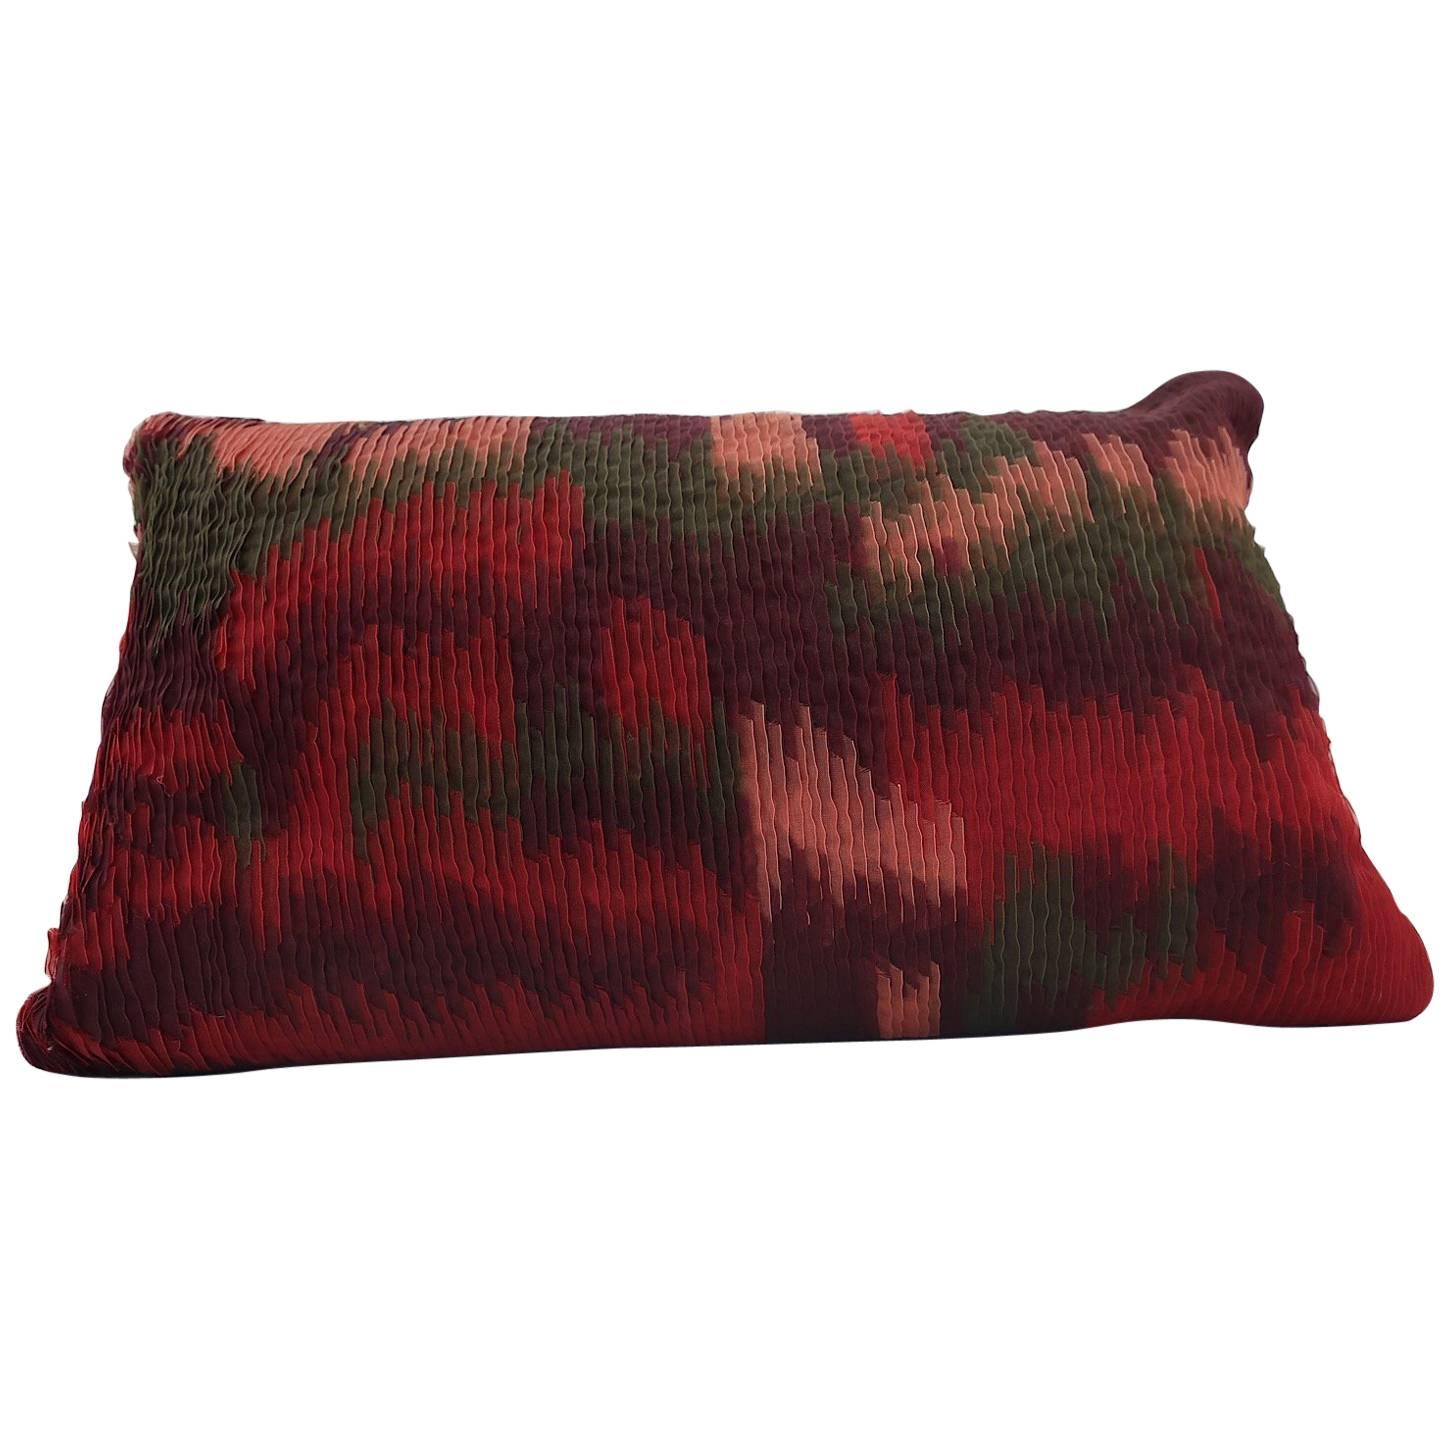 Handcrafted Embroidered Ribbon Work Pillow Ombré Green, Reds, Bordeaux For Sale